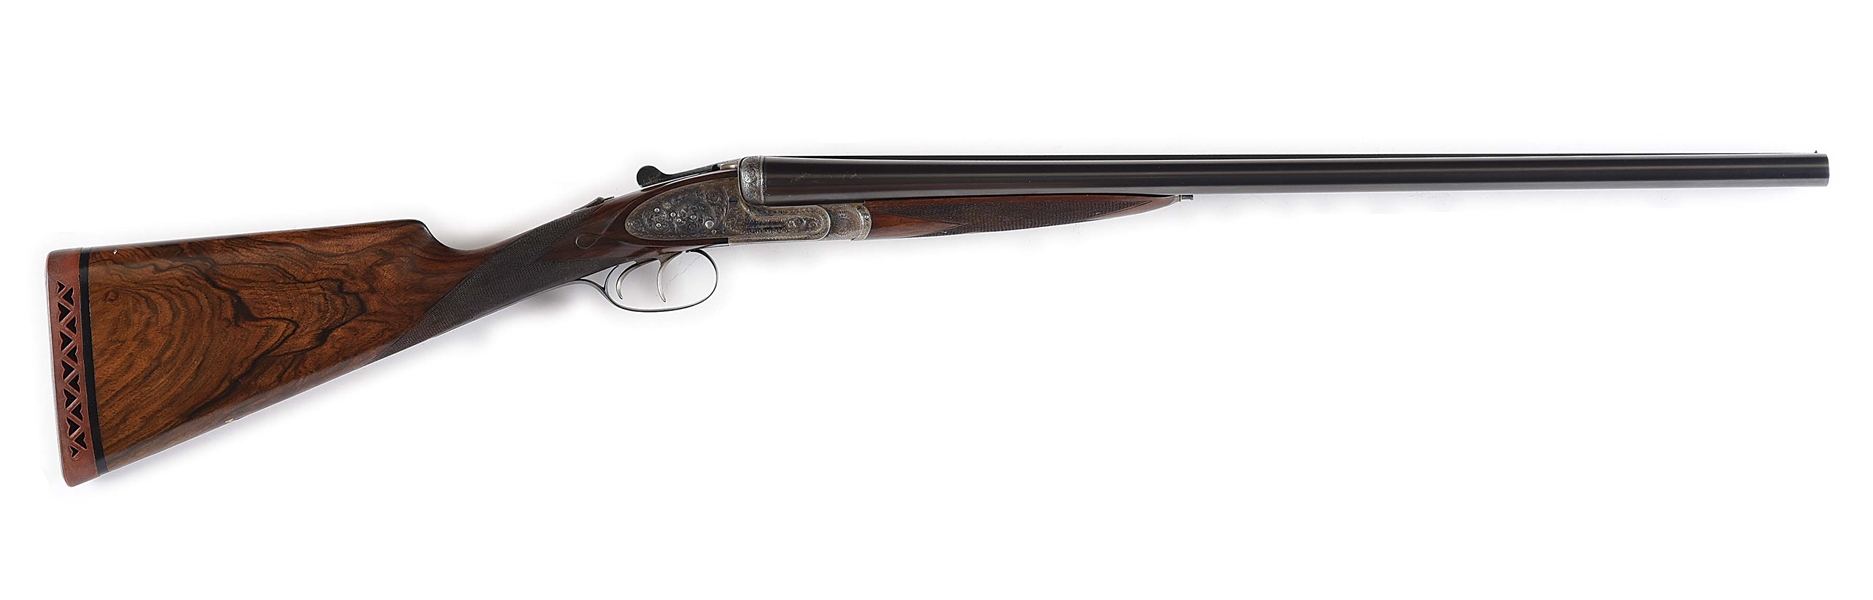 (C) MARCELLUS HARTLEY DODGE SR.S (CHAIRMAN OF THE BOARD OF REMINGTON ARMS) E. J. CHURCHILL "IMPERIAL" GRADE SIDELOCK EJECTOR "XXV" SHOTGUN WITH CASE AND ACCESSORIES